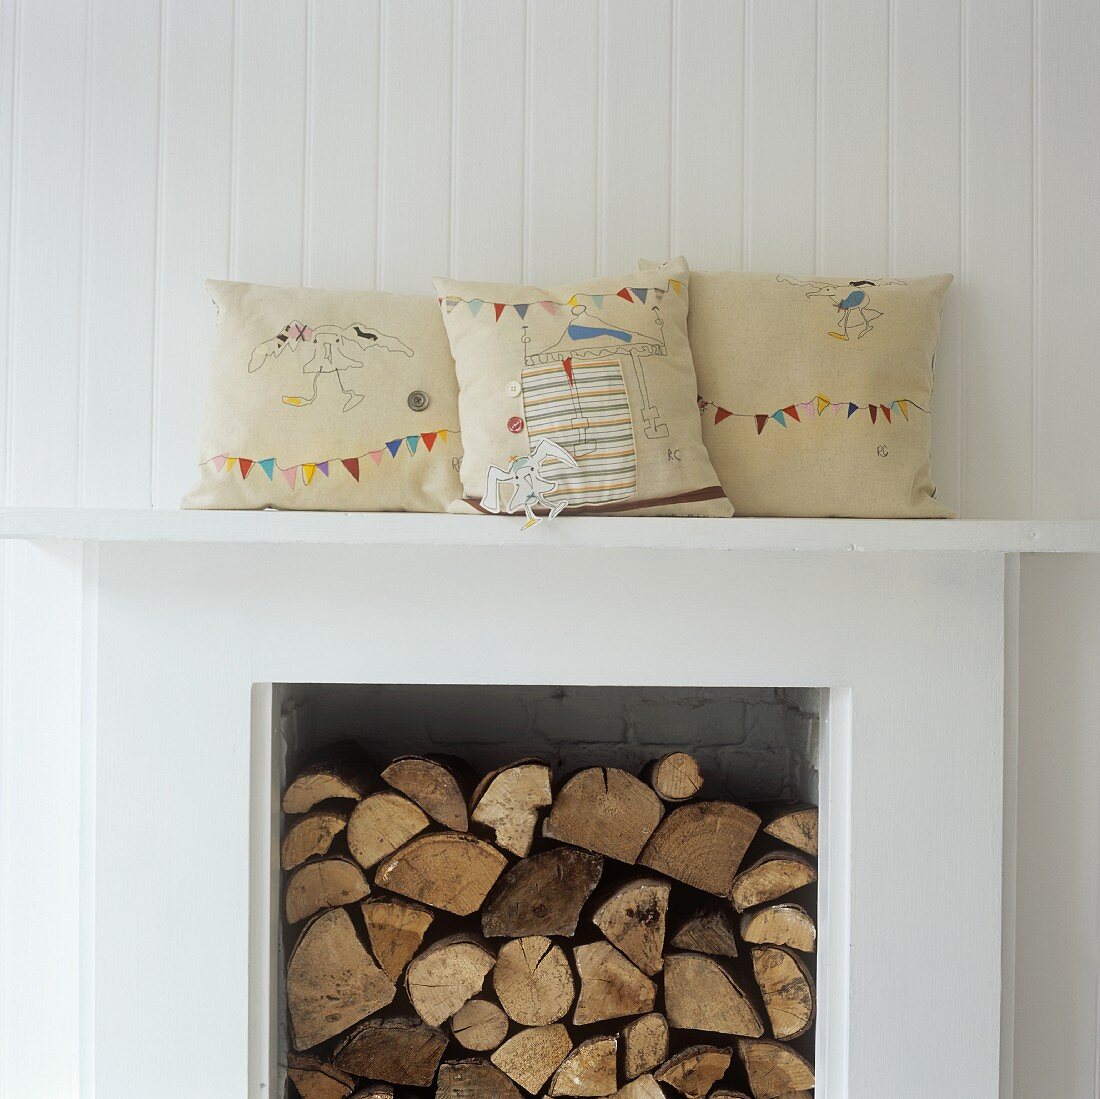 Firewood in a fireplace and decorative pillows on the mantelpiece